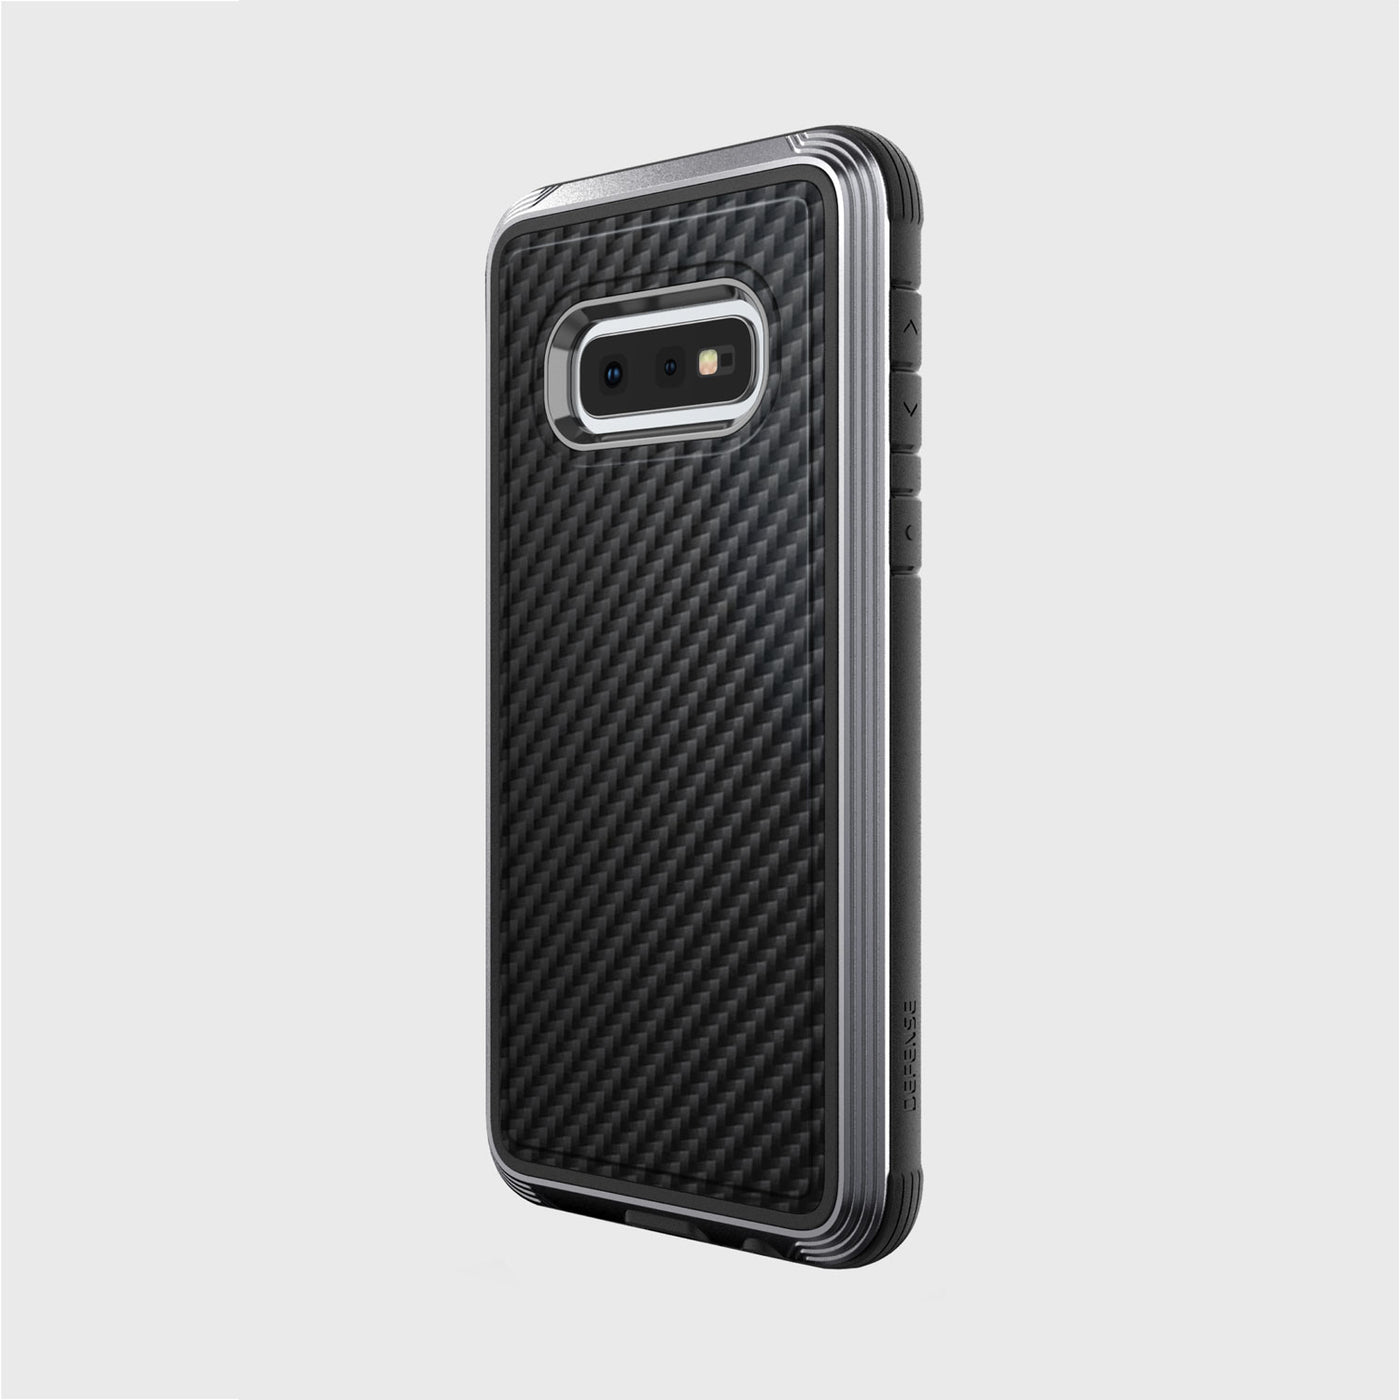 Luxurious Case for Samsung Galaxy S10e. Raptic Lux in black carbon fiber.